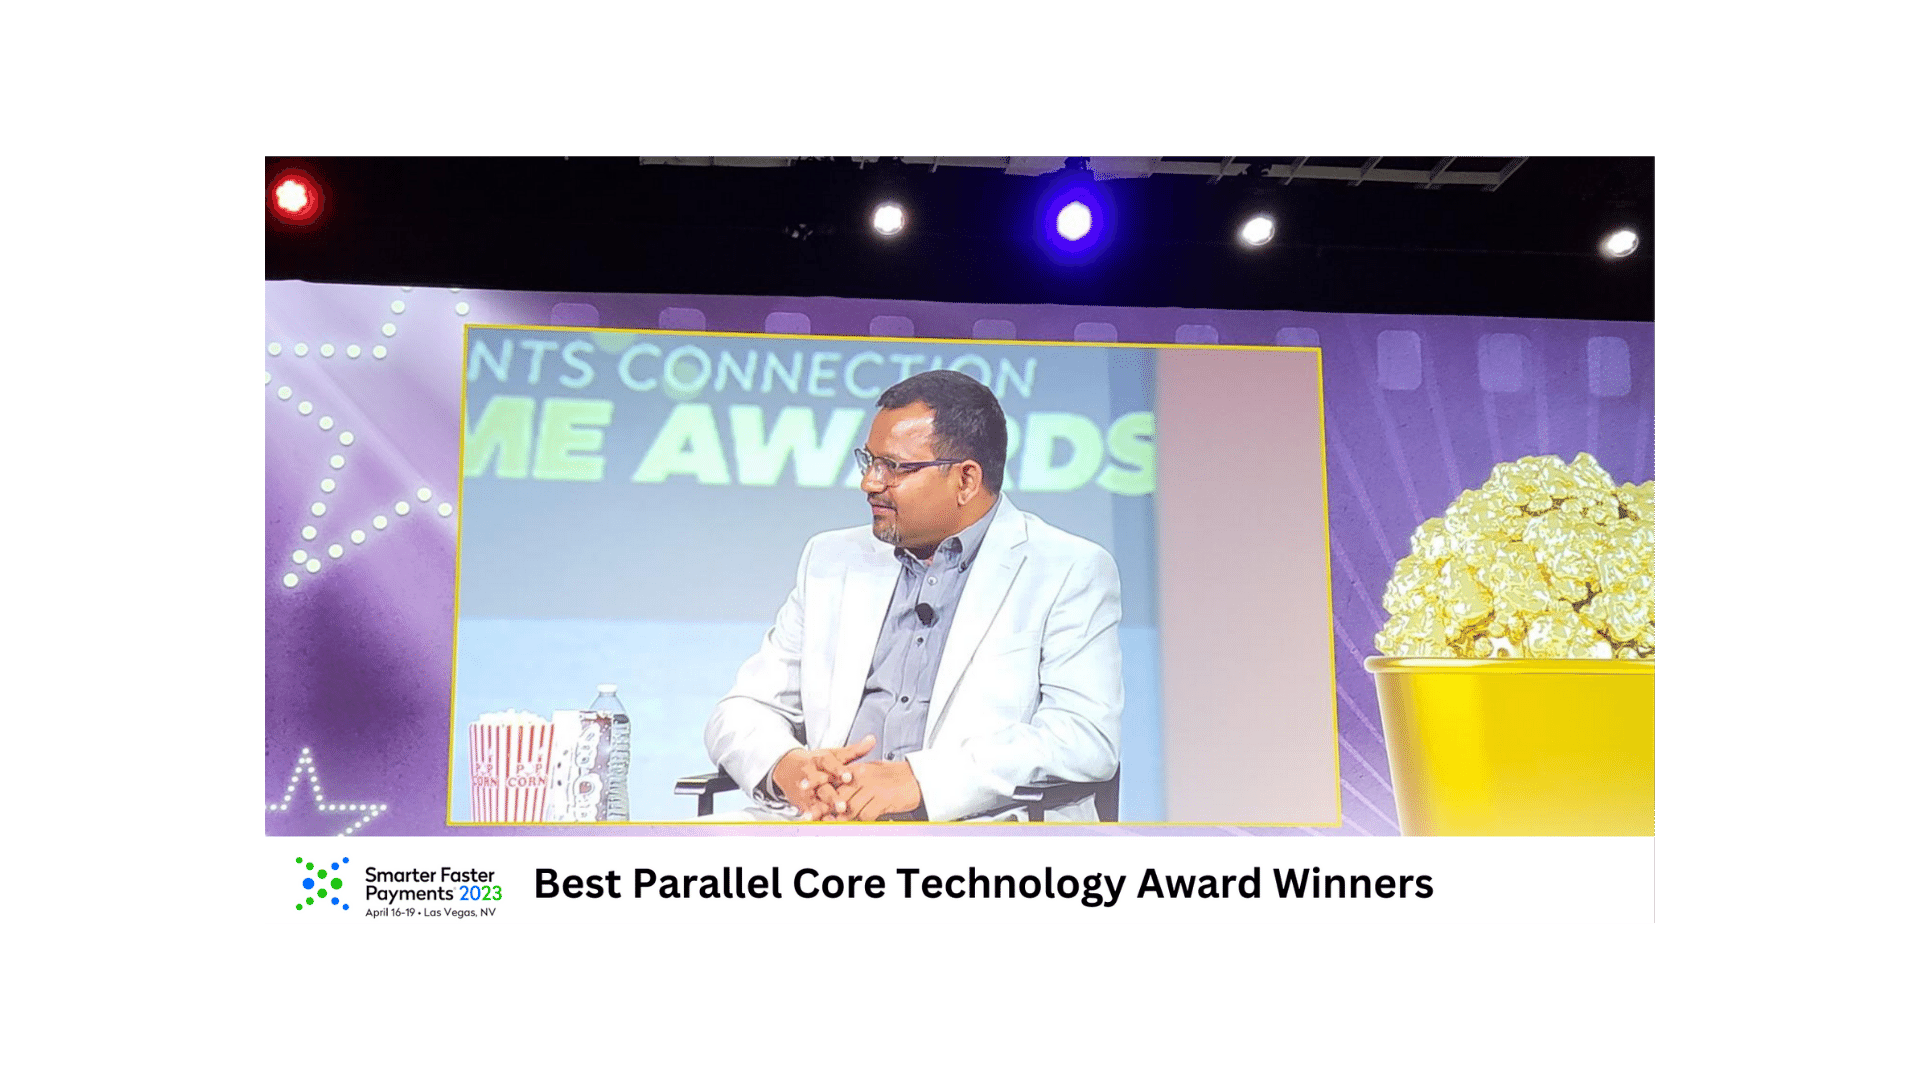 Finzly Wins at Nacha conference for Best Parallel Core Technology